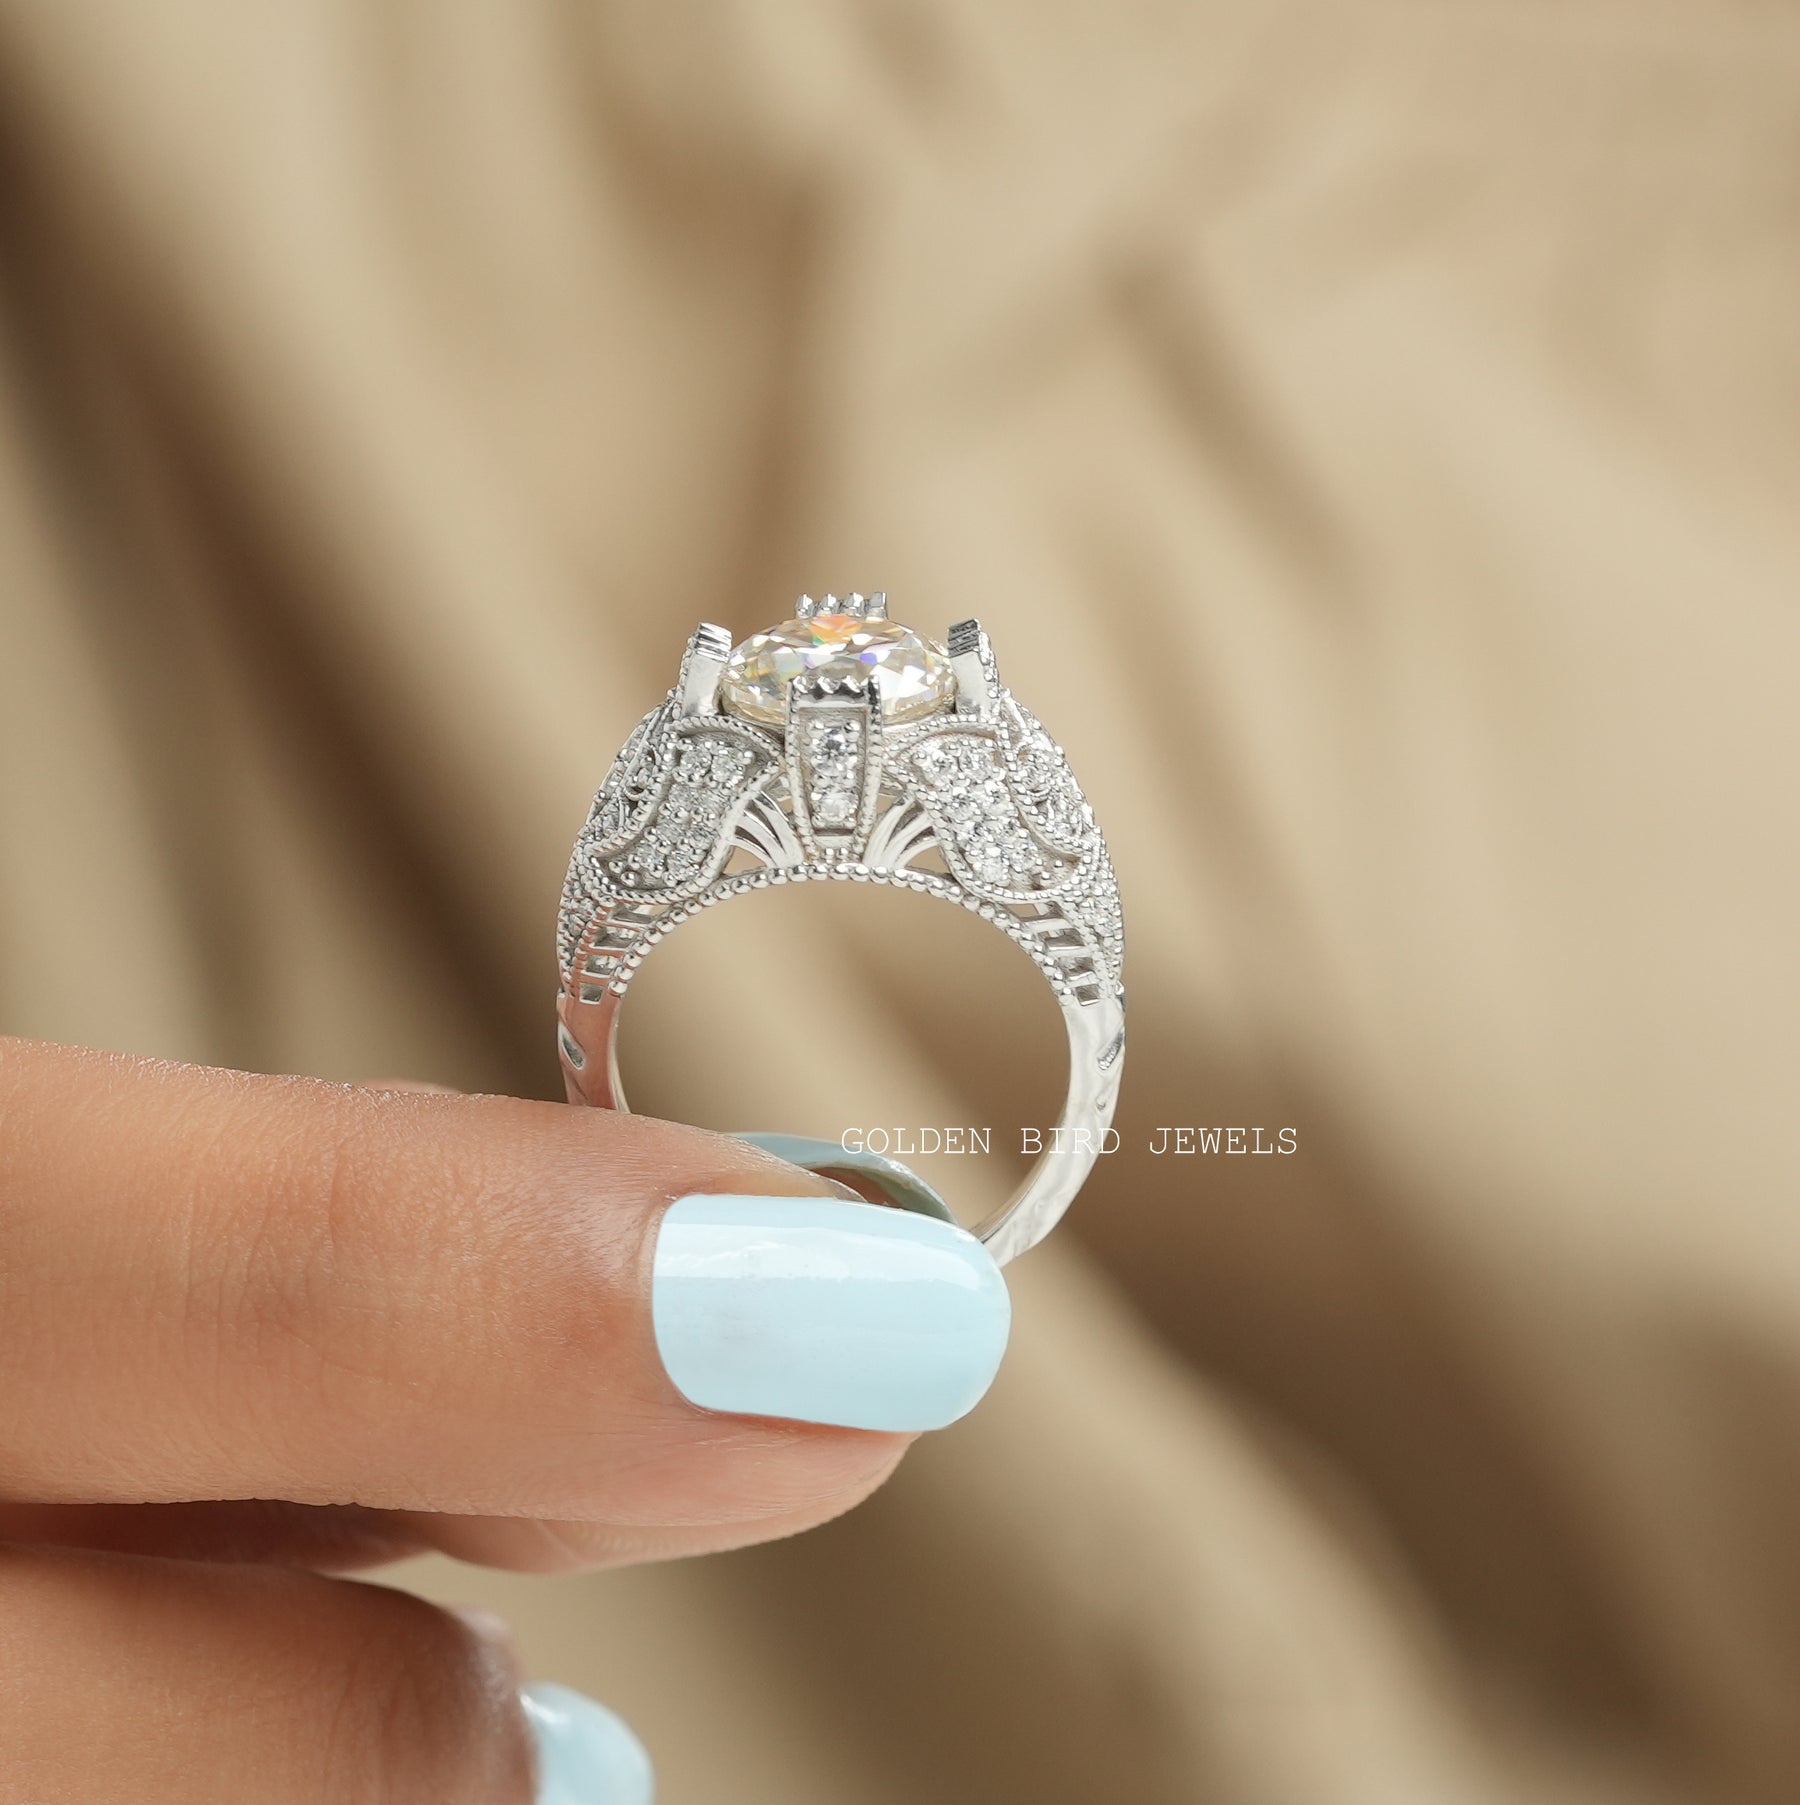 [A woman's hand holding art deco moissanite engagement ring with a colorless stone]-[Golden Bird Jewels]